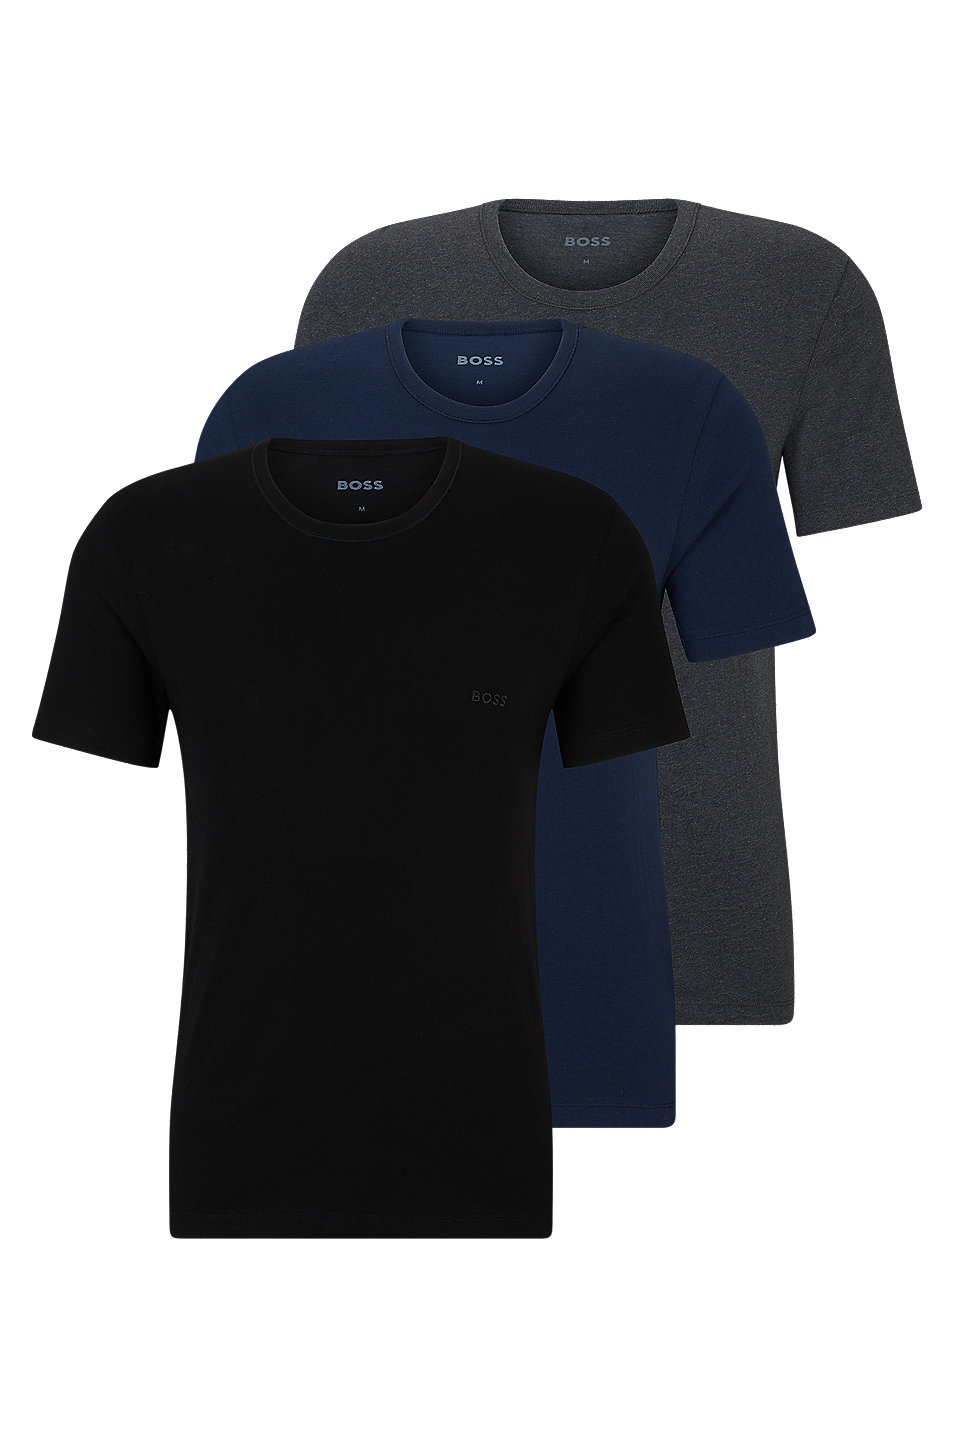 BOSS - Three-pack of logo-embroidered T-shirts in cotton